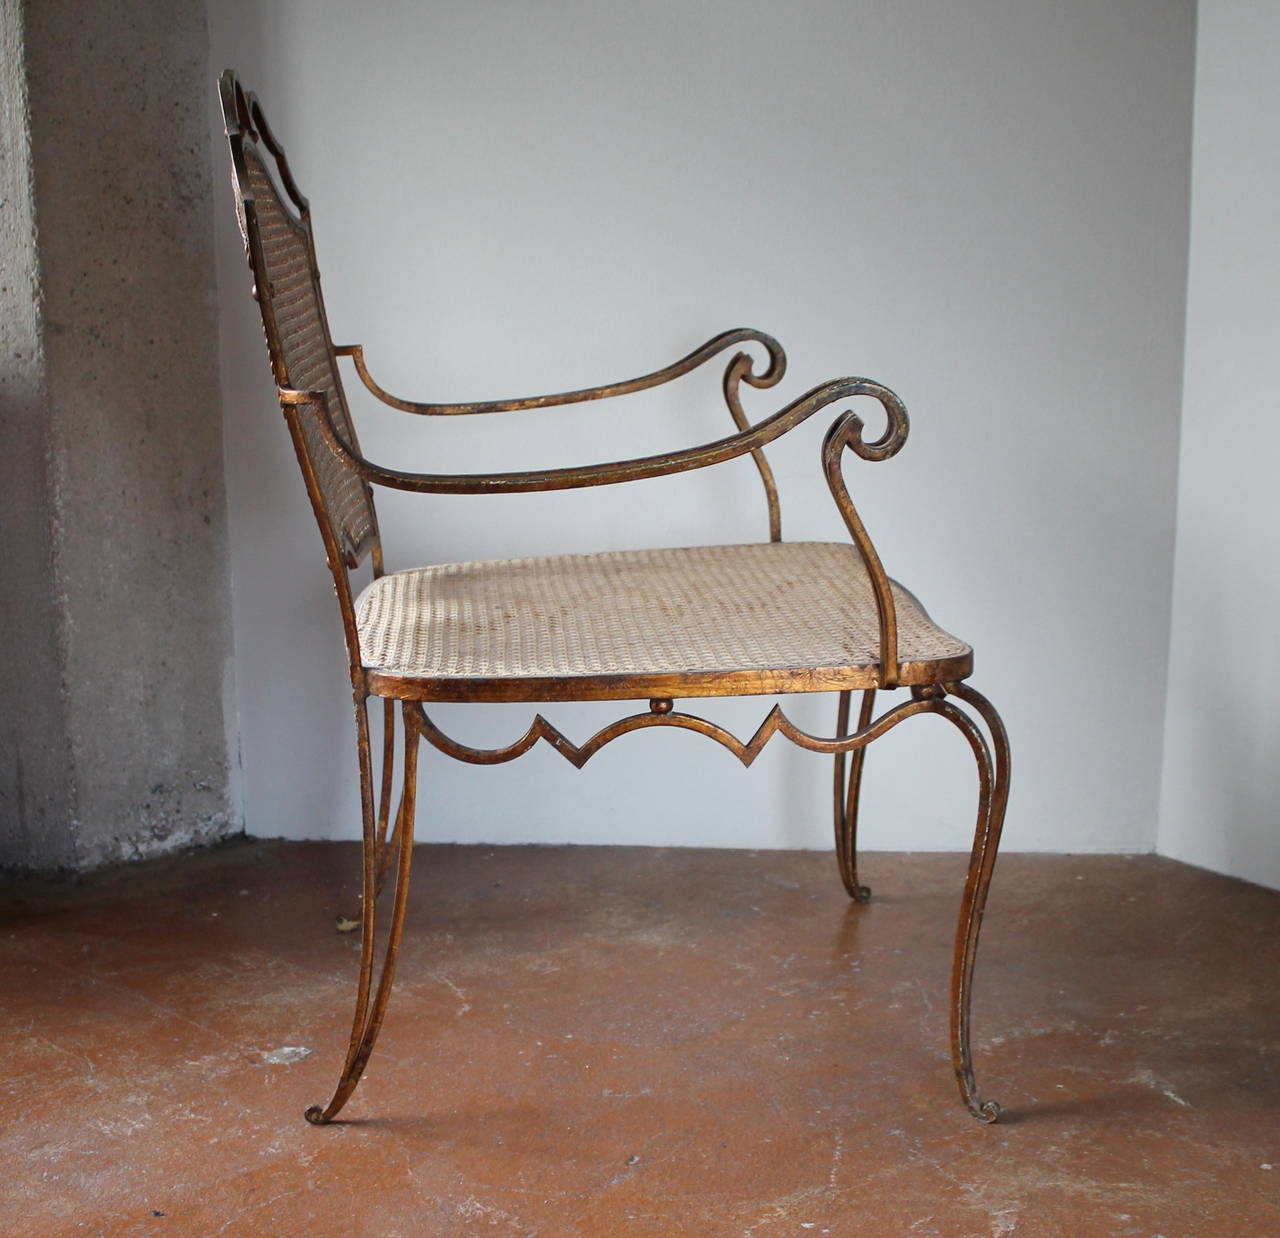 Mid-20th Century Rare Set of Four Arturo Pani Gilded Iron Armchairs, Mexico City, 1940s For Sale